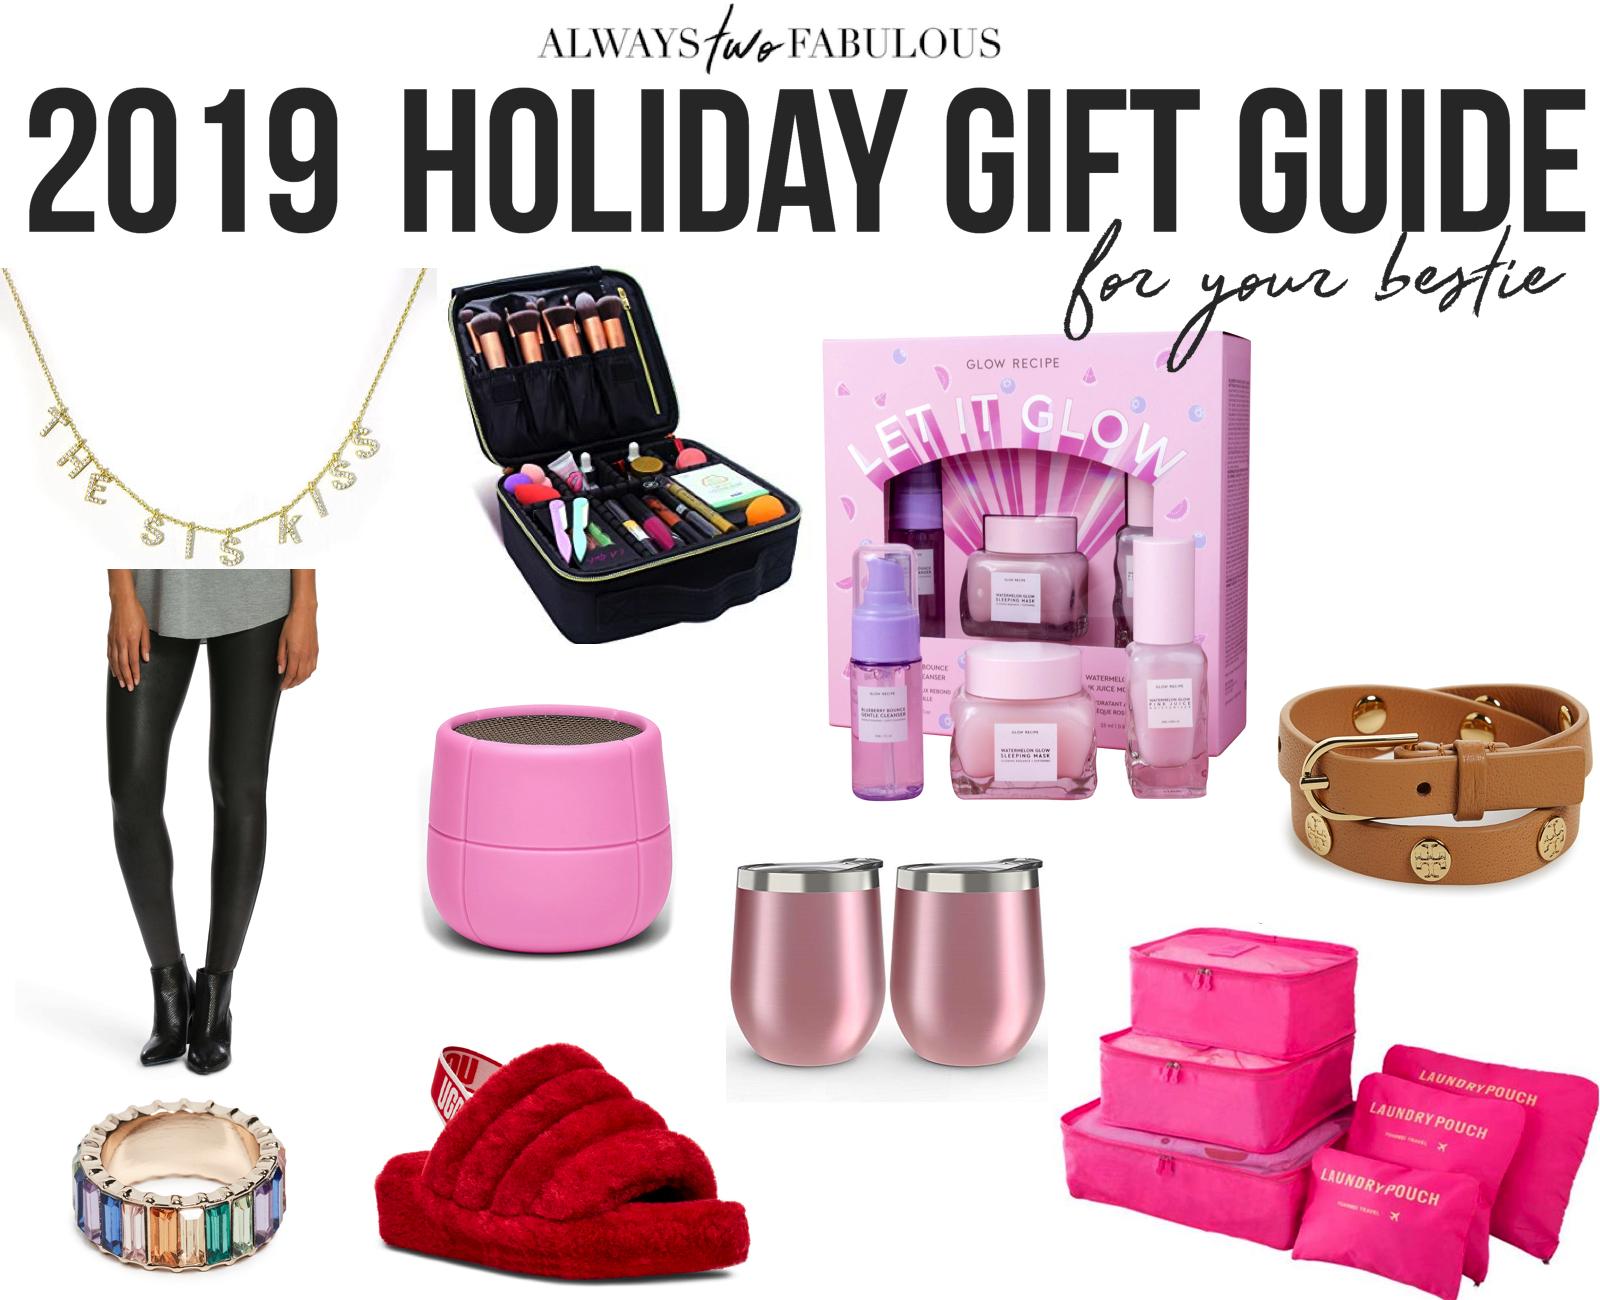 A2F Holiday Gift Guide for Your Bestie